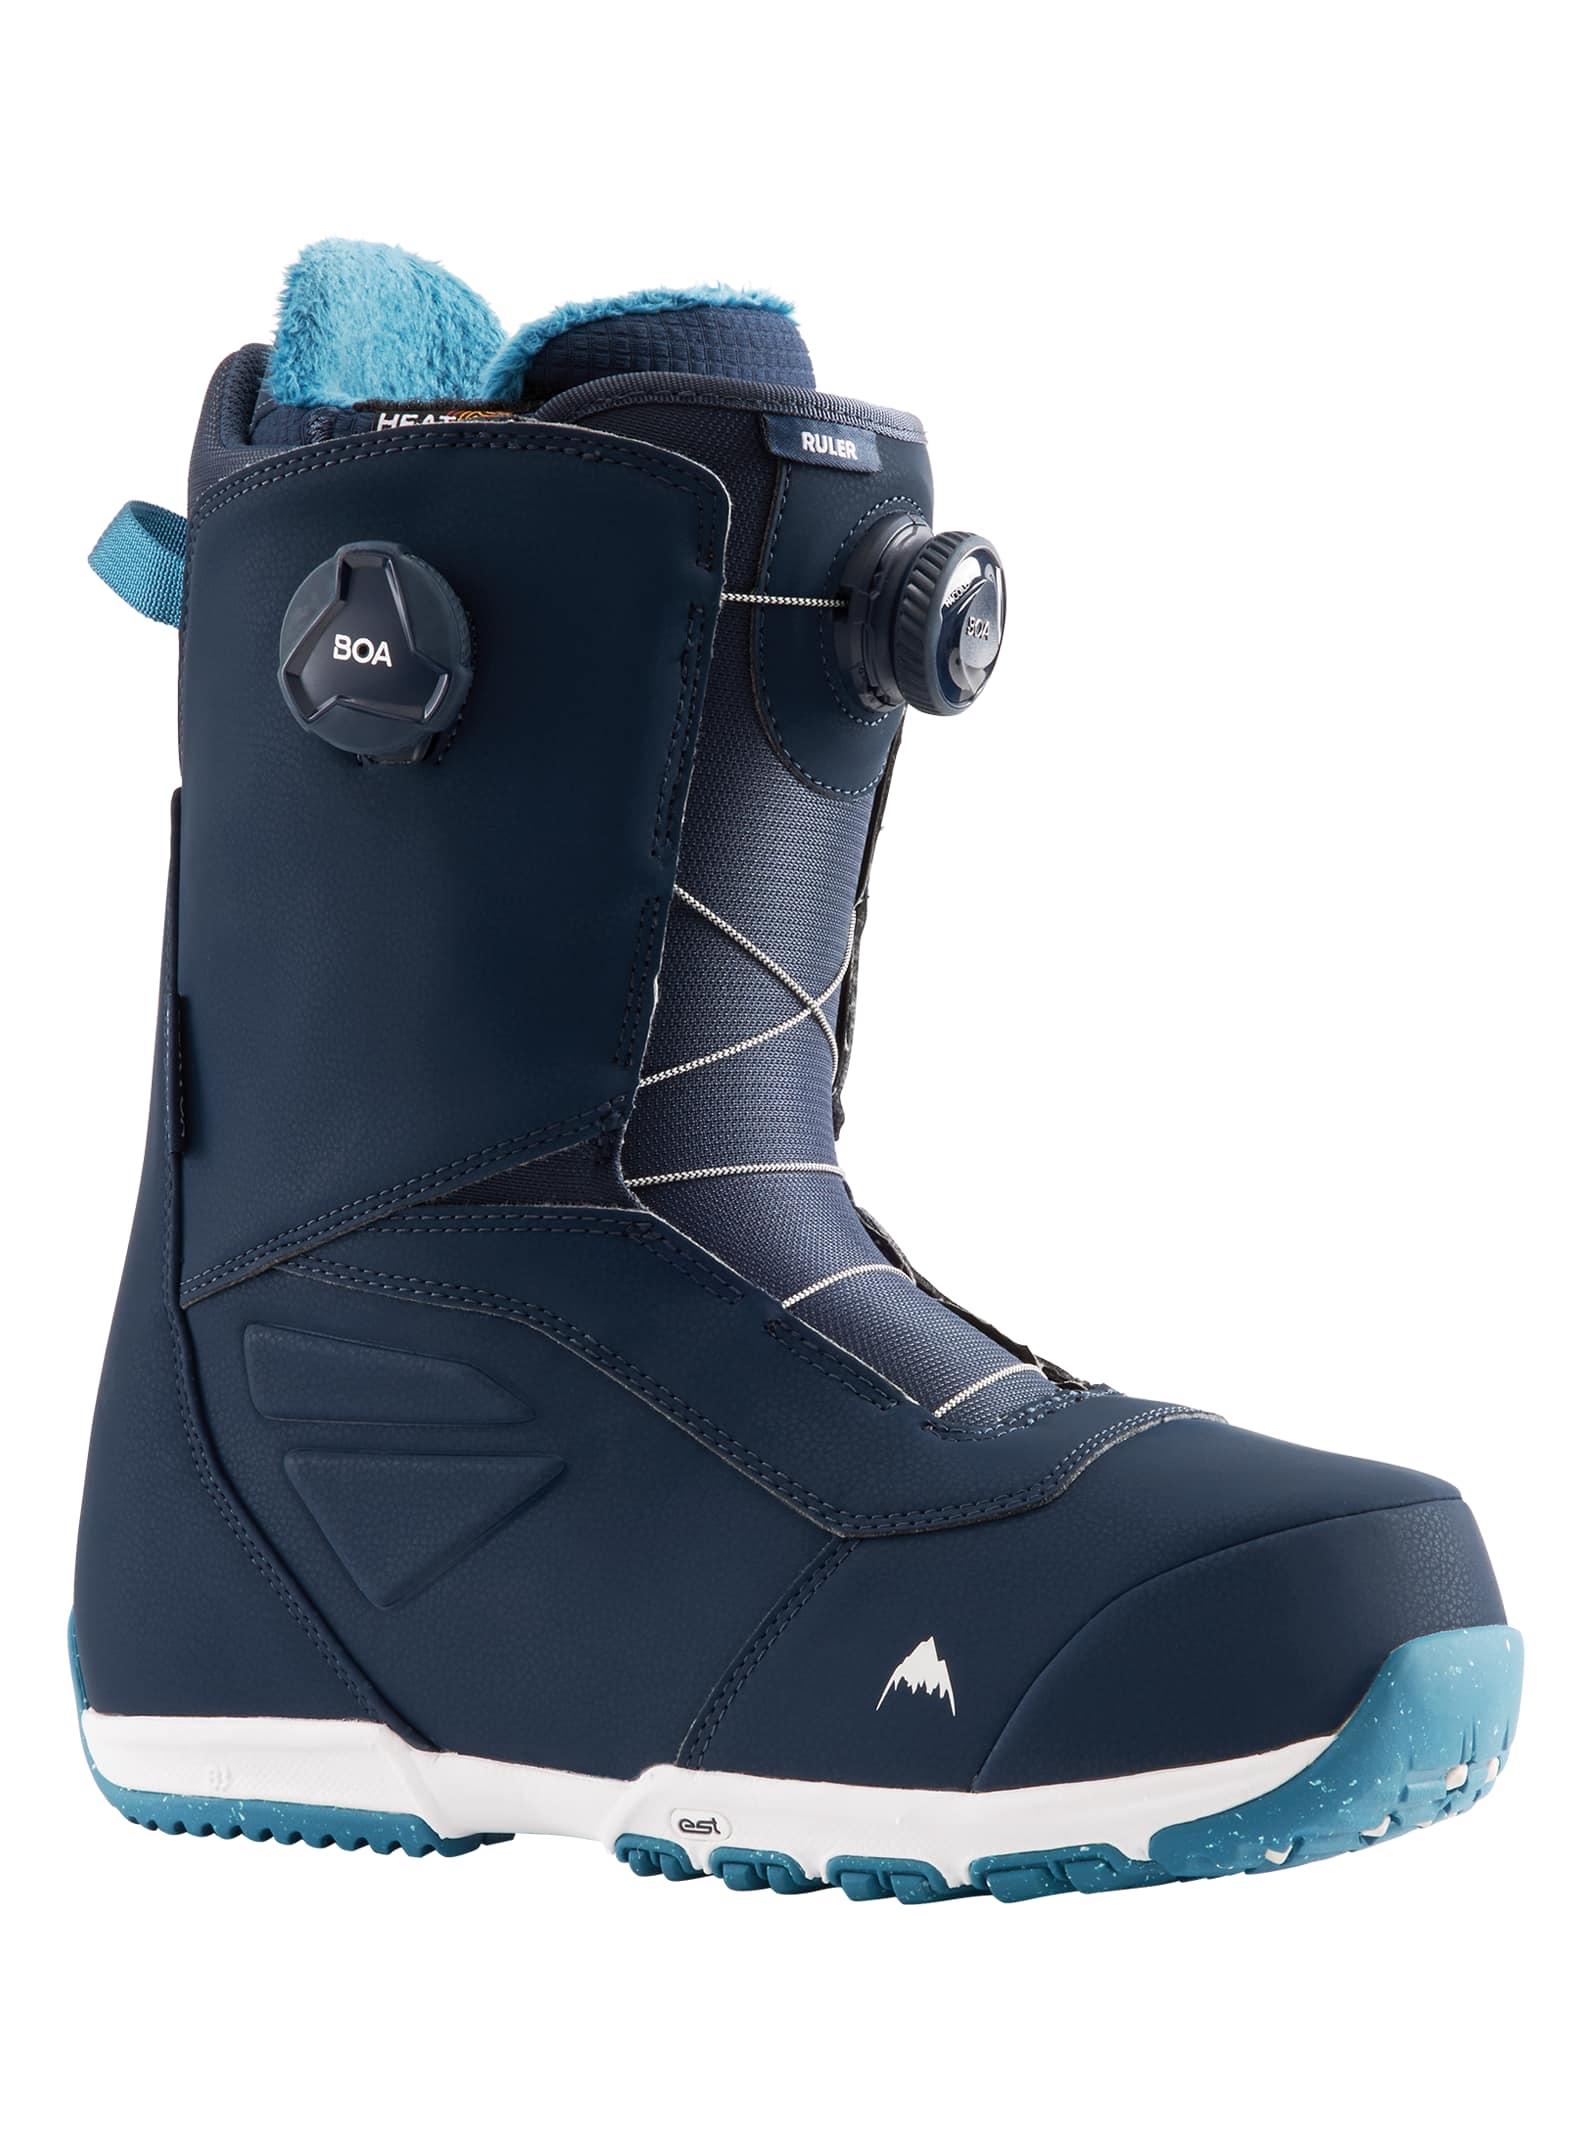 snow board boots on sale